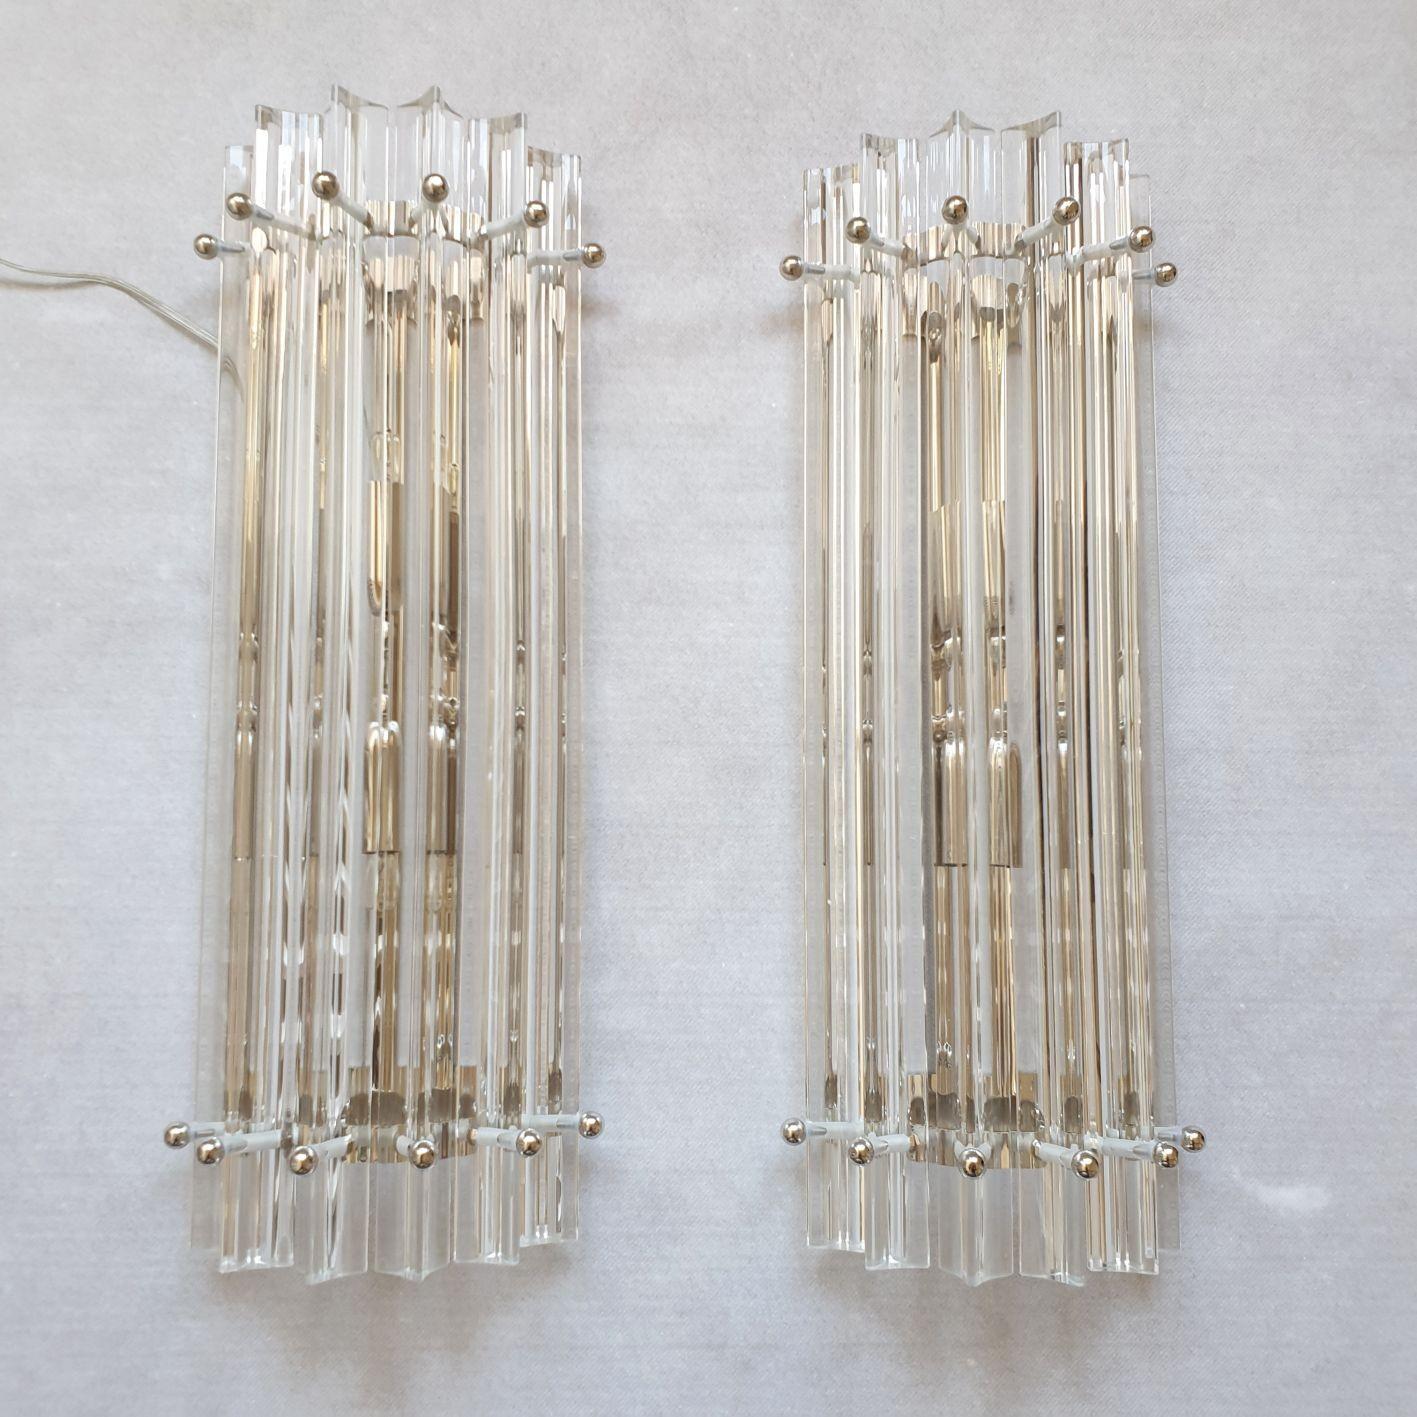 Pair of Triedri Murano glass wall sconces, or flush-mounts, Mid-Century Modern by Venini, Italy 1980s.
Set of four pairs, or eight sconces available.
Sold and priced by pair.
The vintage sconces have chrome mounts.
Two-light each, rewired for the